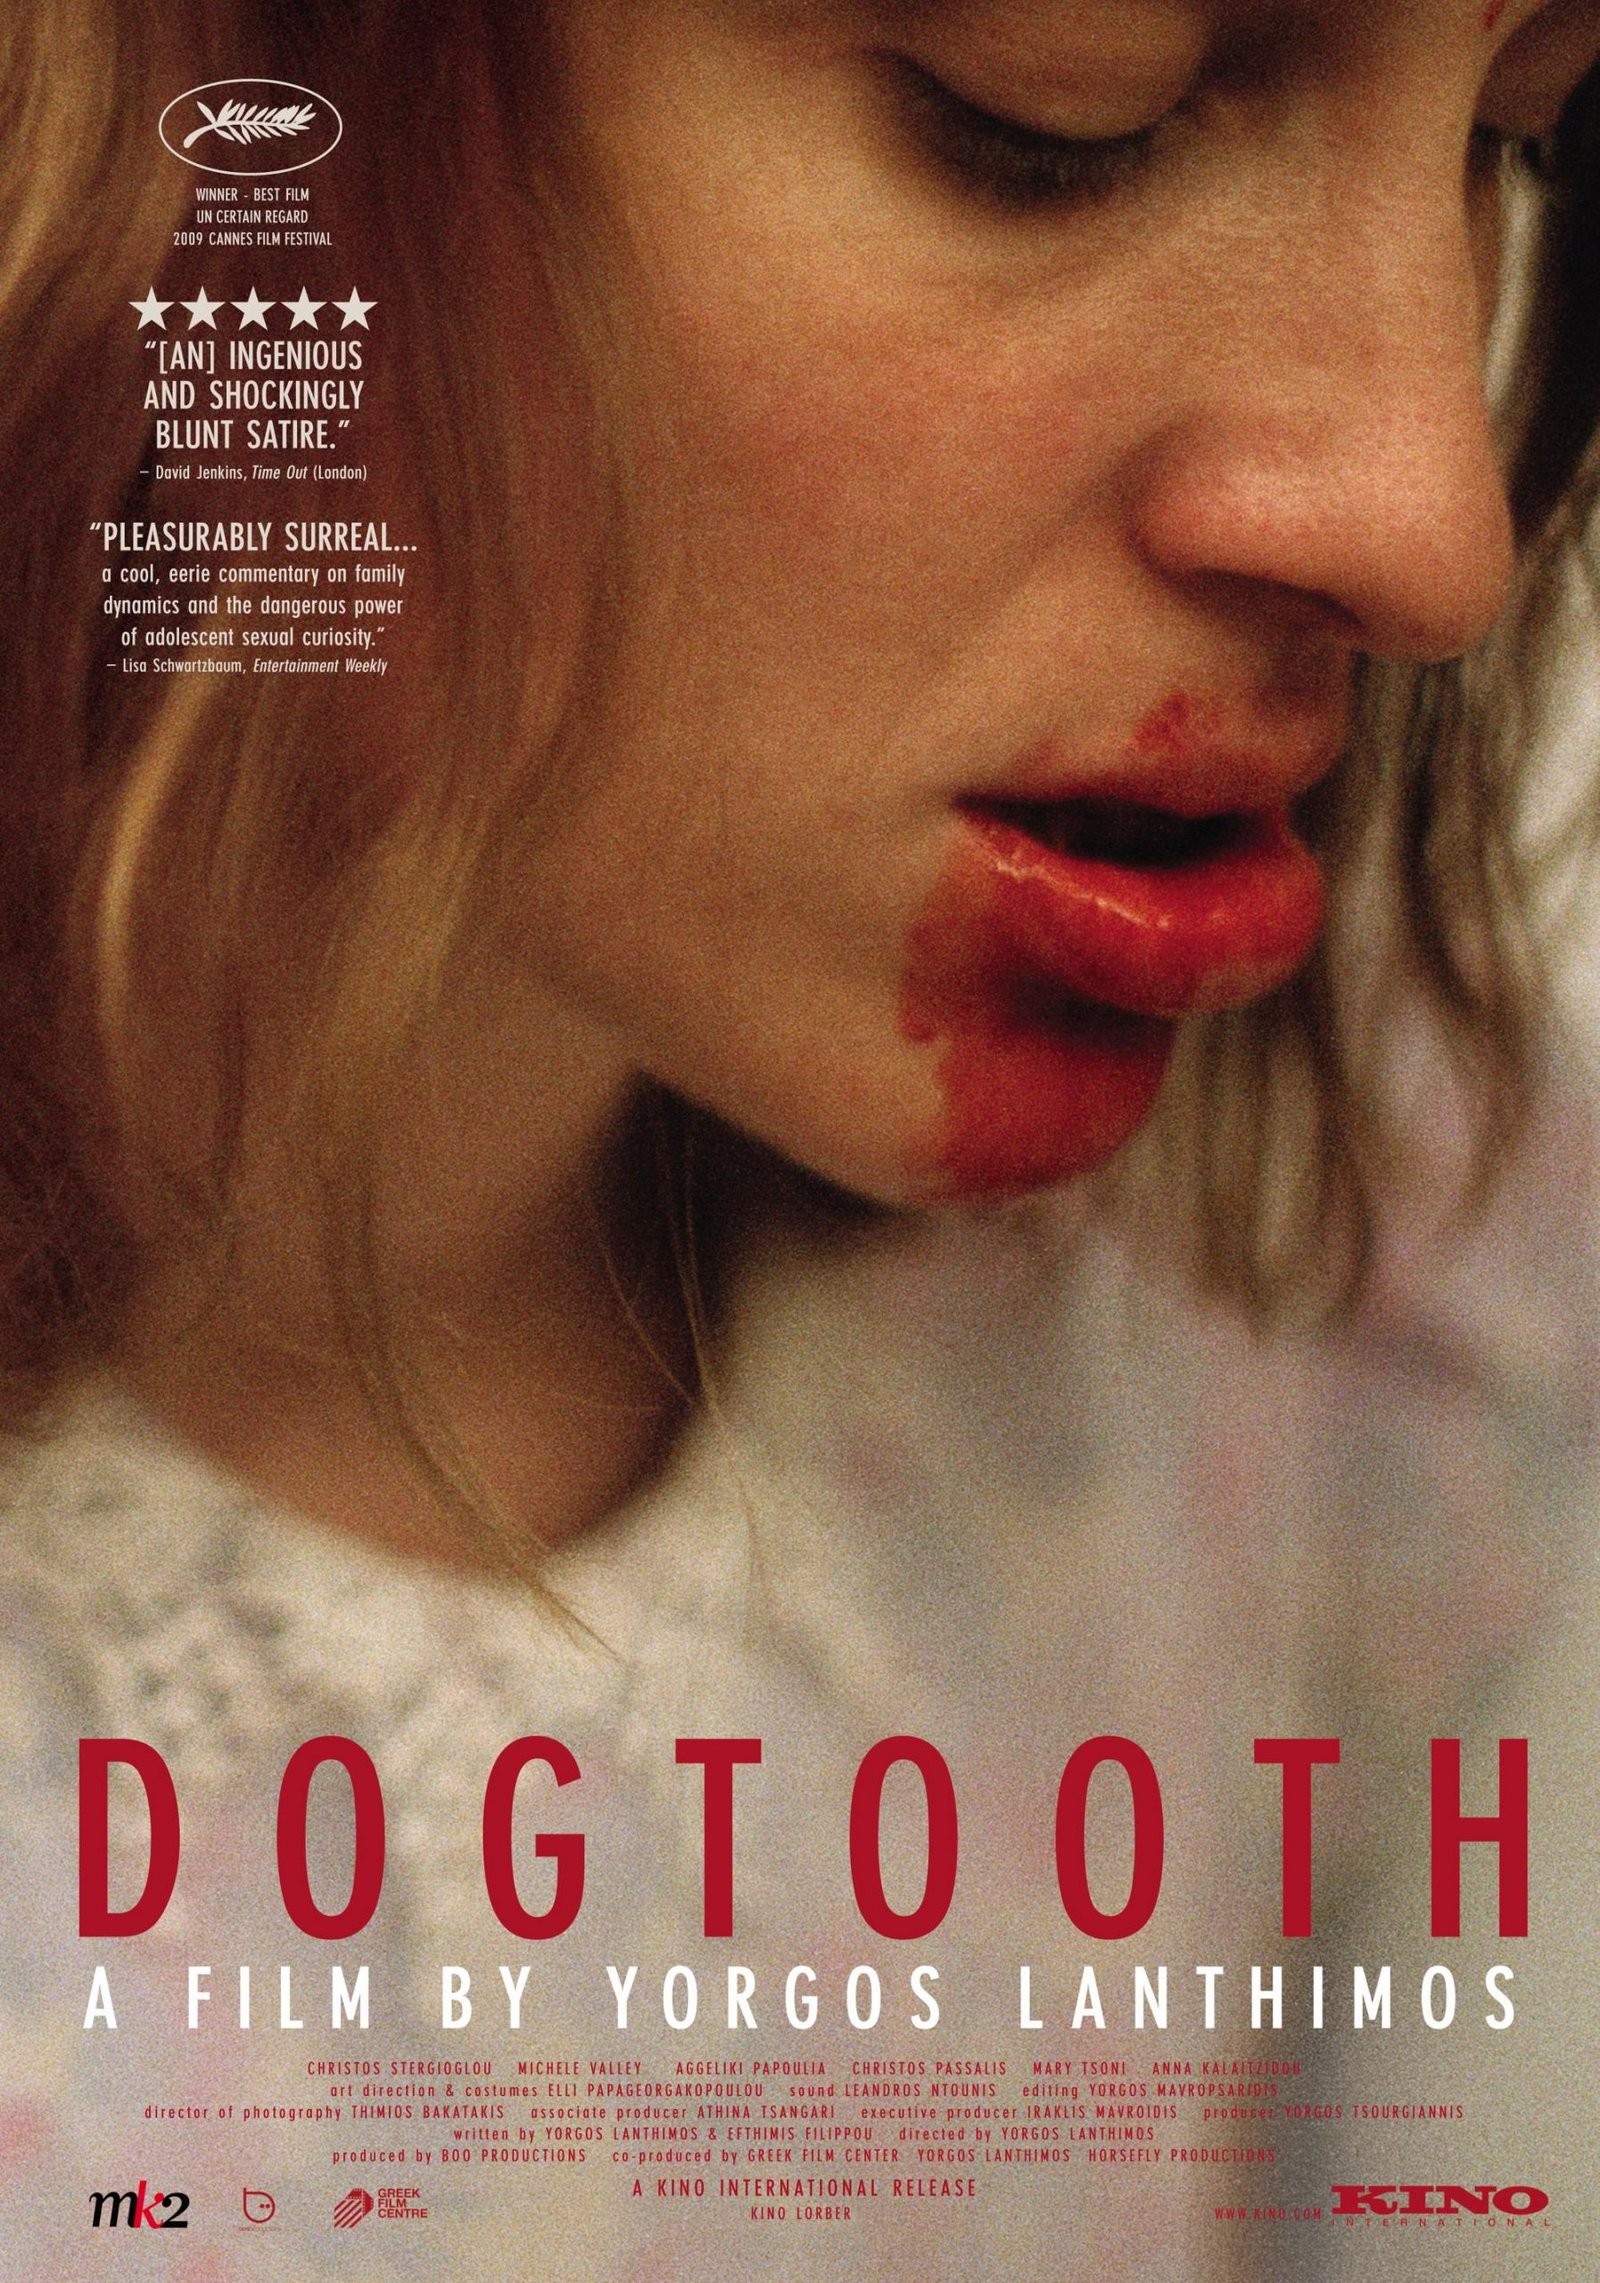 Dogtooth Dark Comedy Film Review 1680648202795 Scaled